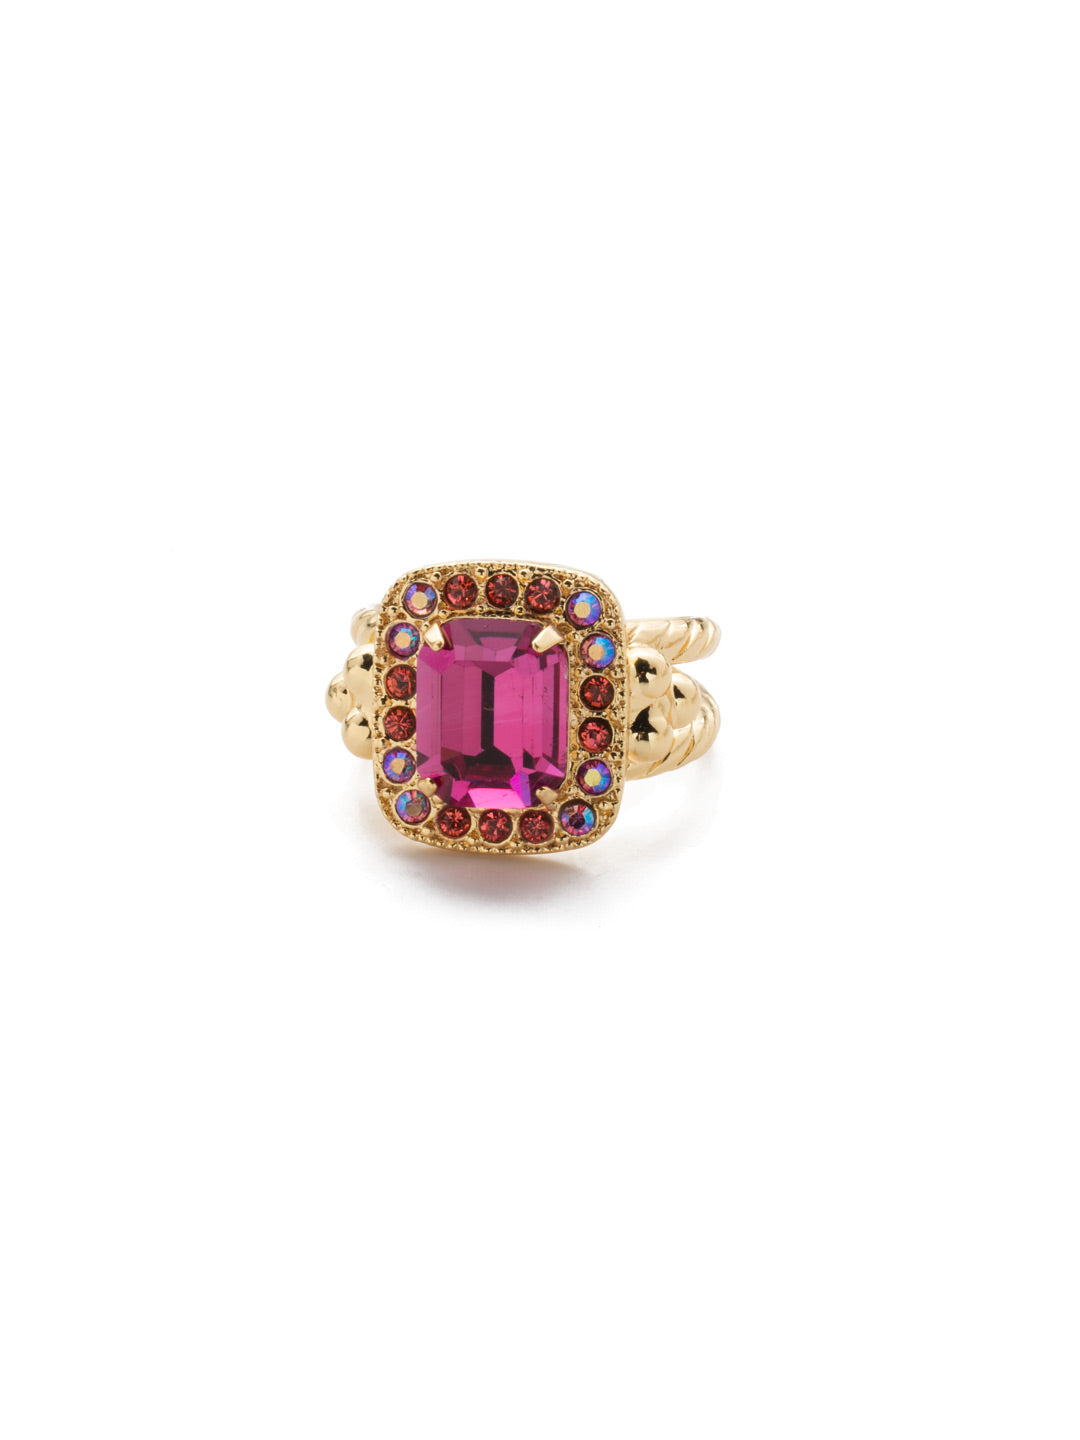 Opulent Octagon Cocktail Ring - RDQ41BGBGA - A central crystal surrounded by petite gems perches atop an adjustable double band. From Sorrelli's Begonia collection in our Bright Gold-tone finish.